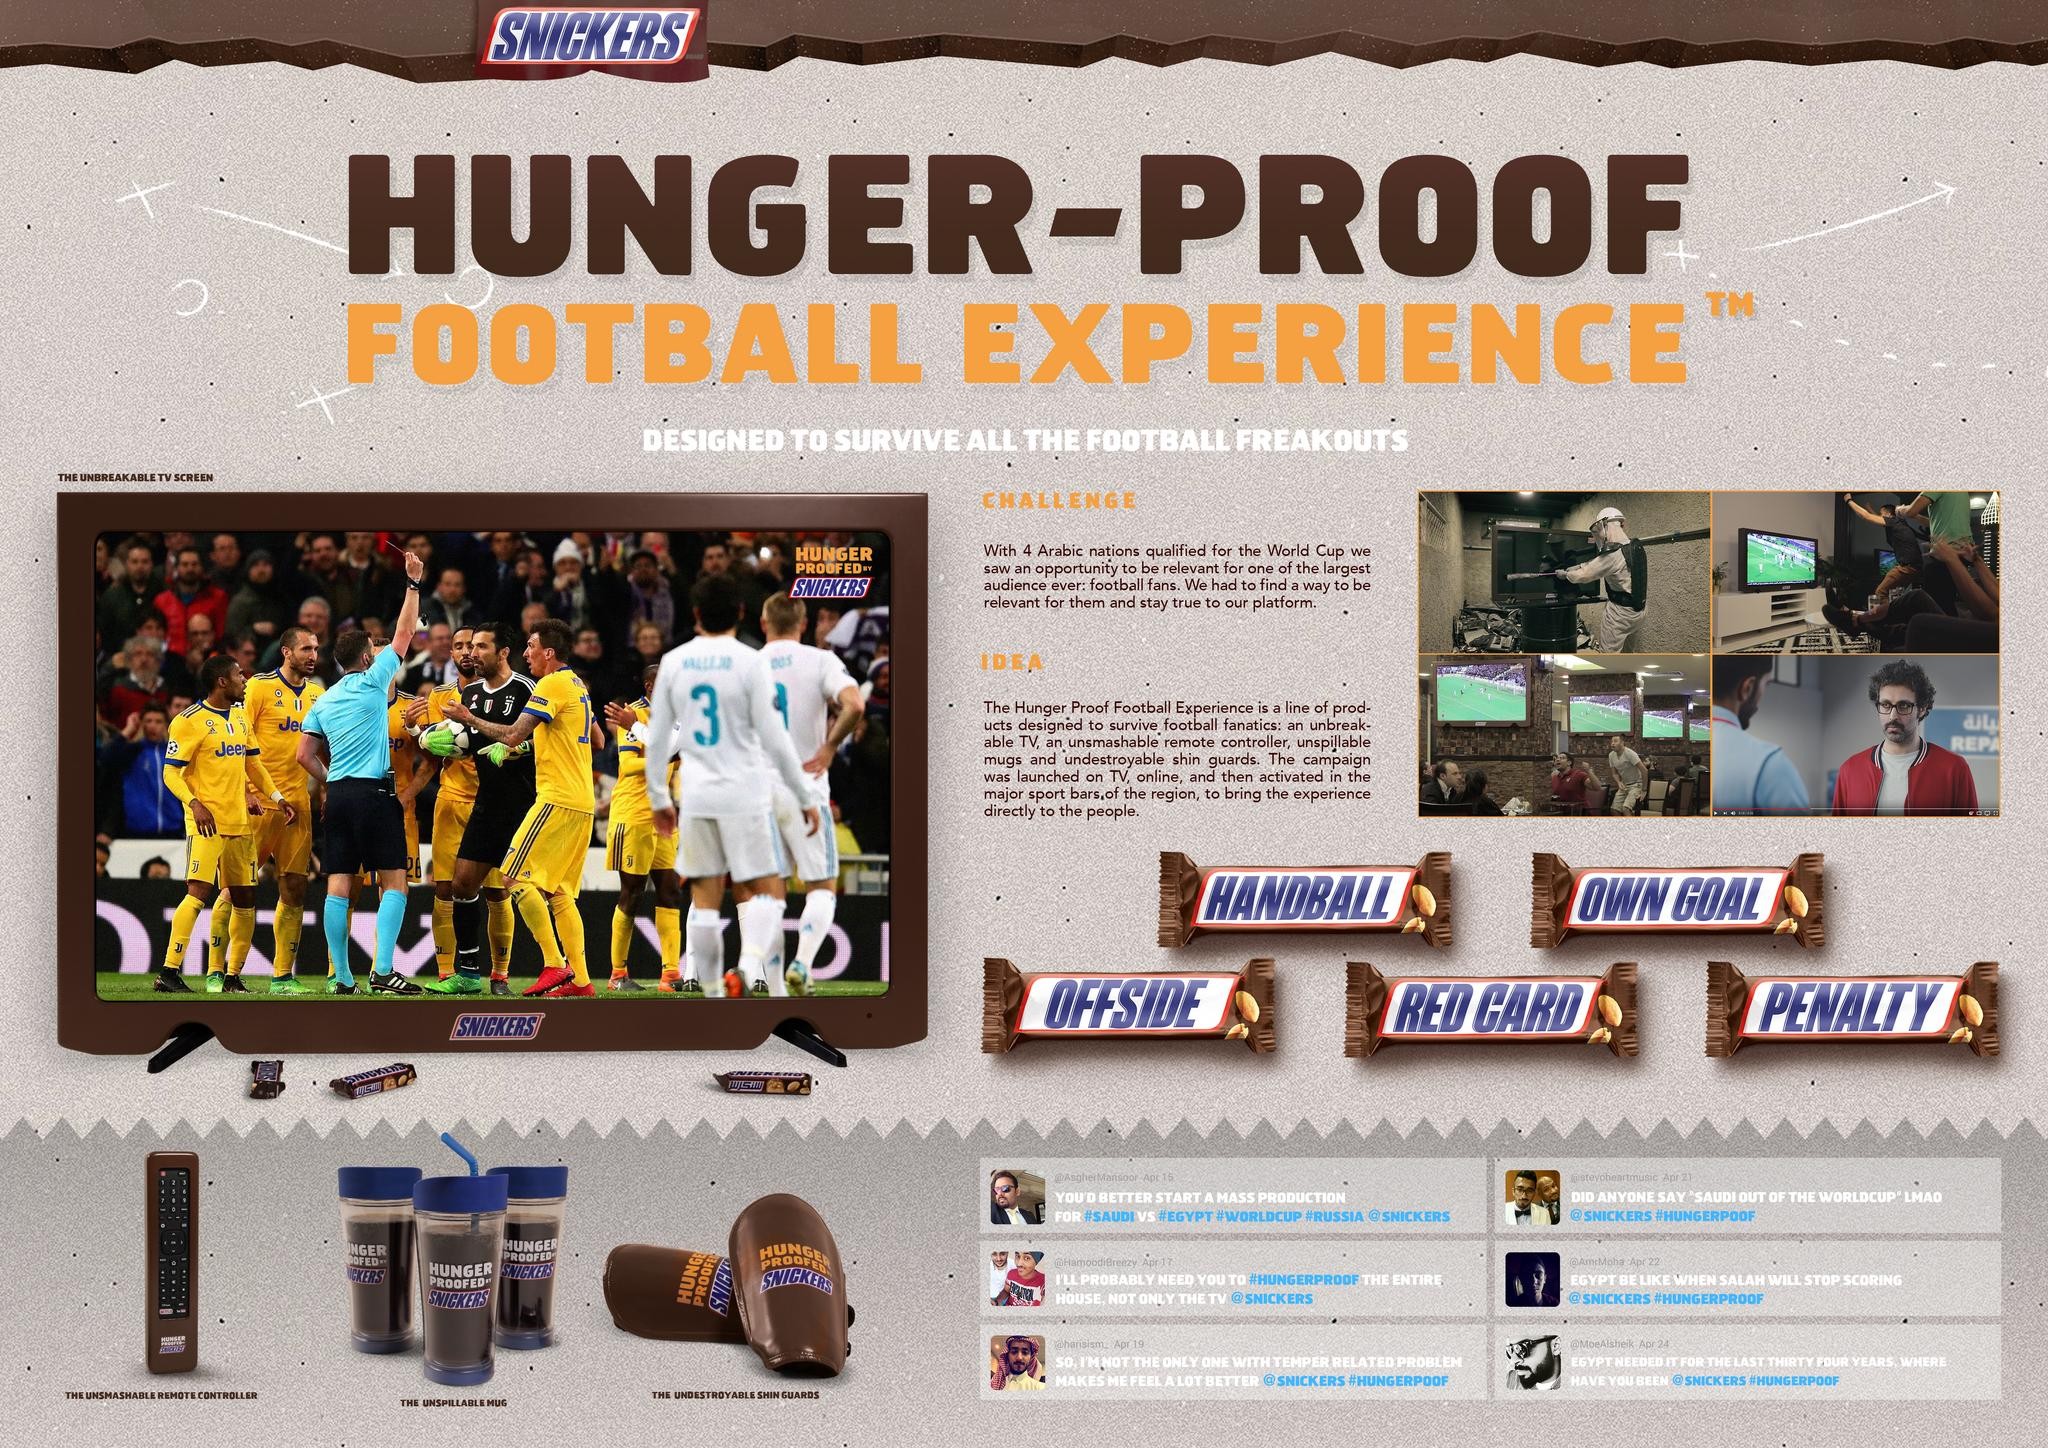 The Hunger Proof Football Experience